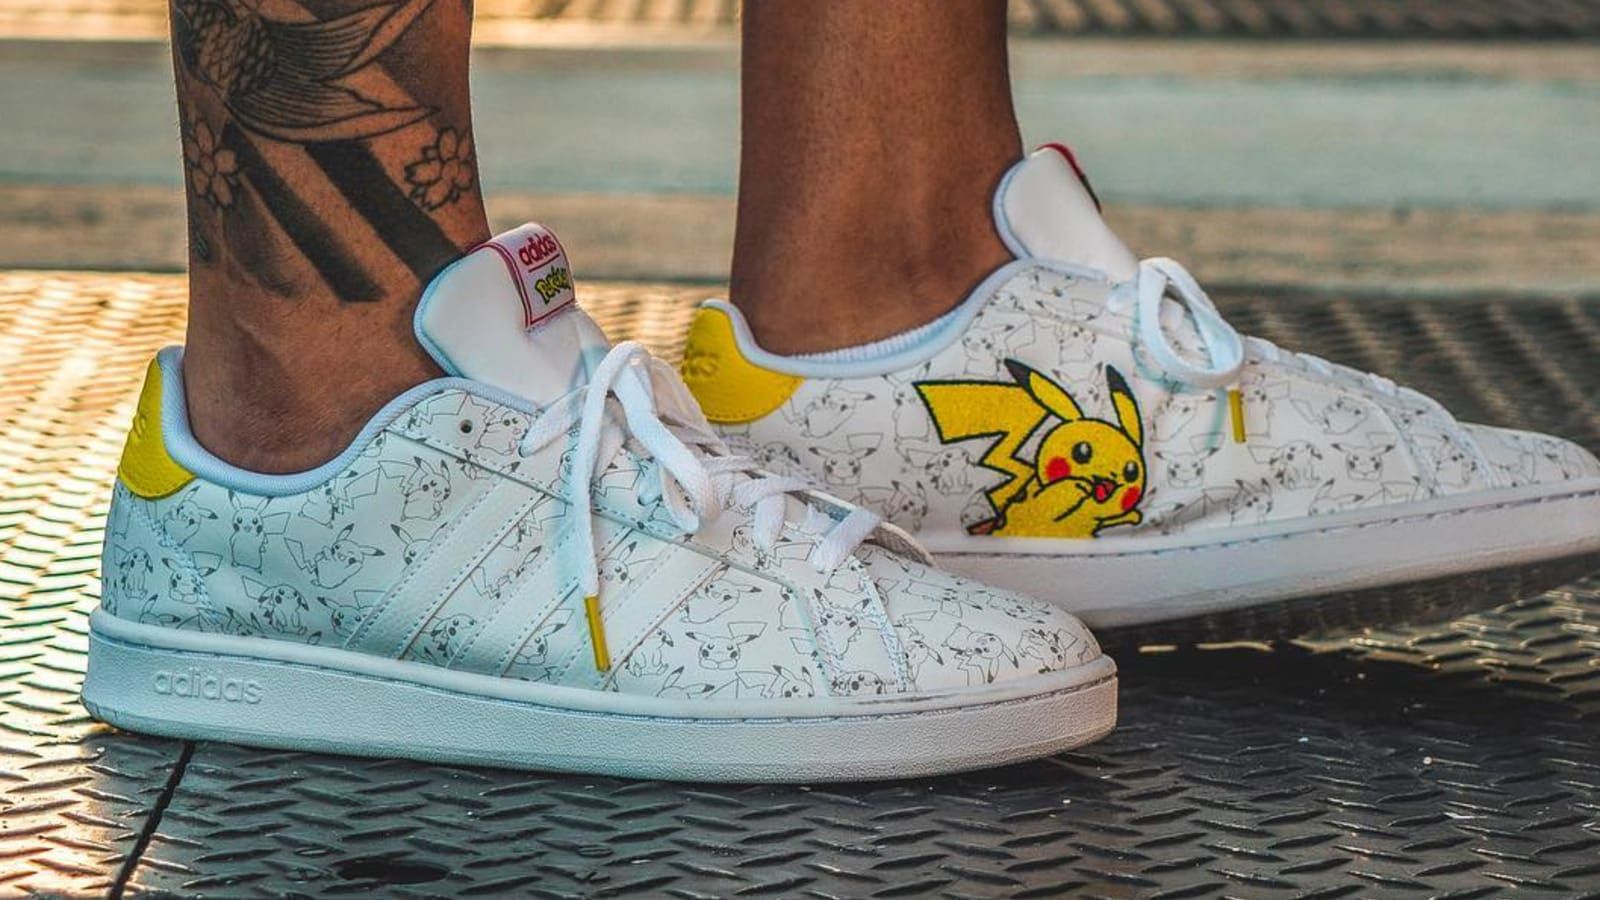 Addias is Coming Out With Pikachu Inspired Sneakers